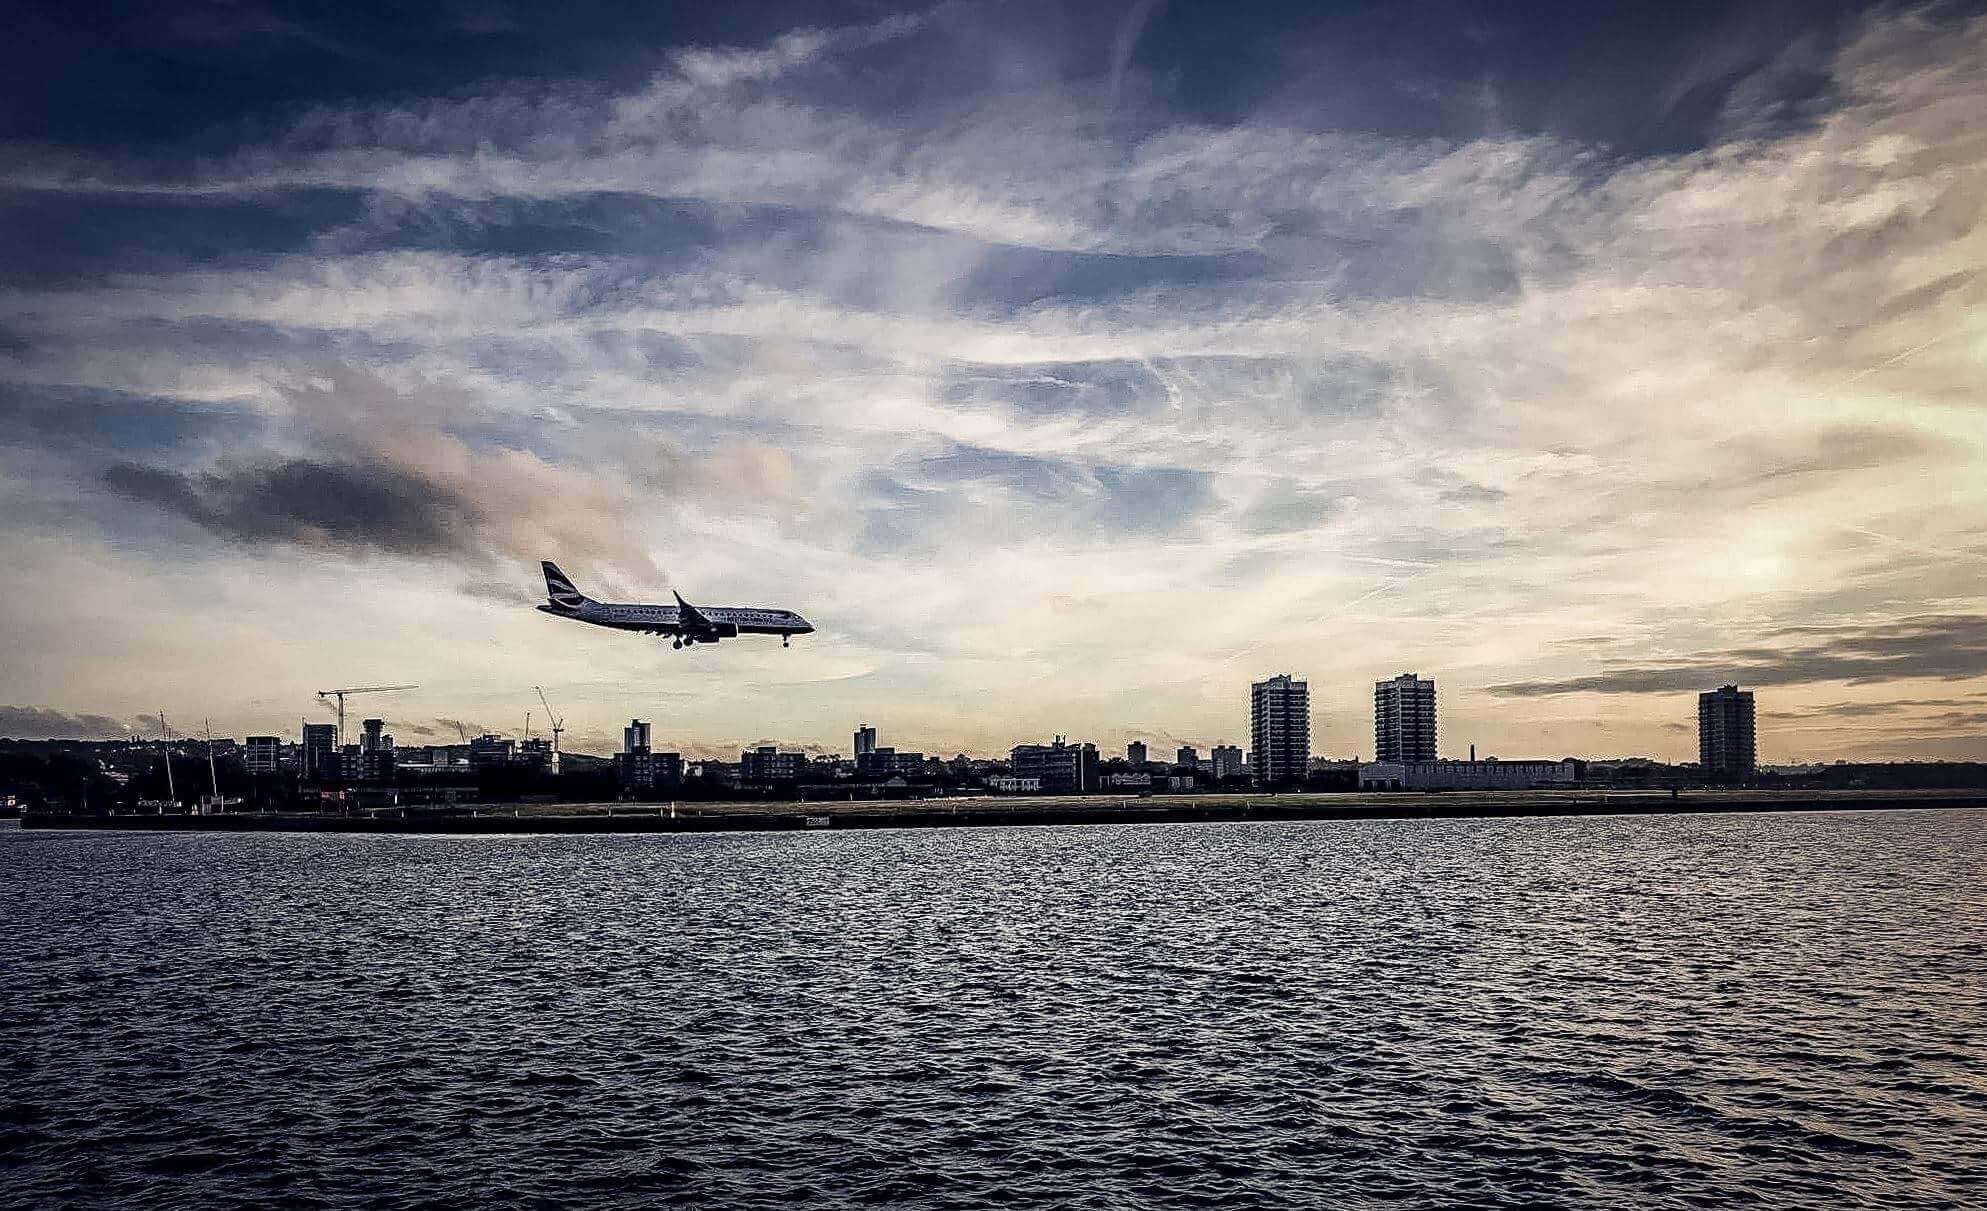 aircraft coming into land provides flight search data useful to hotel revenue managers